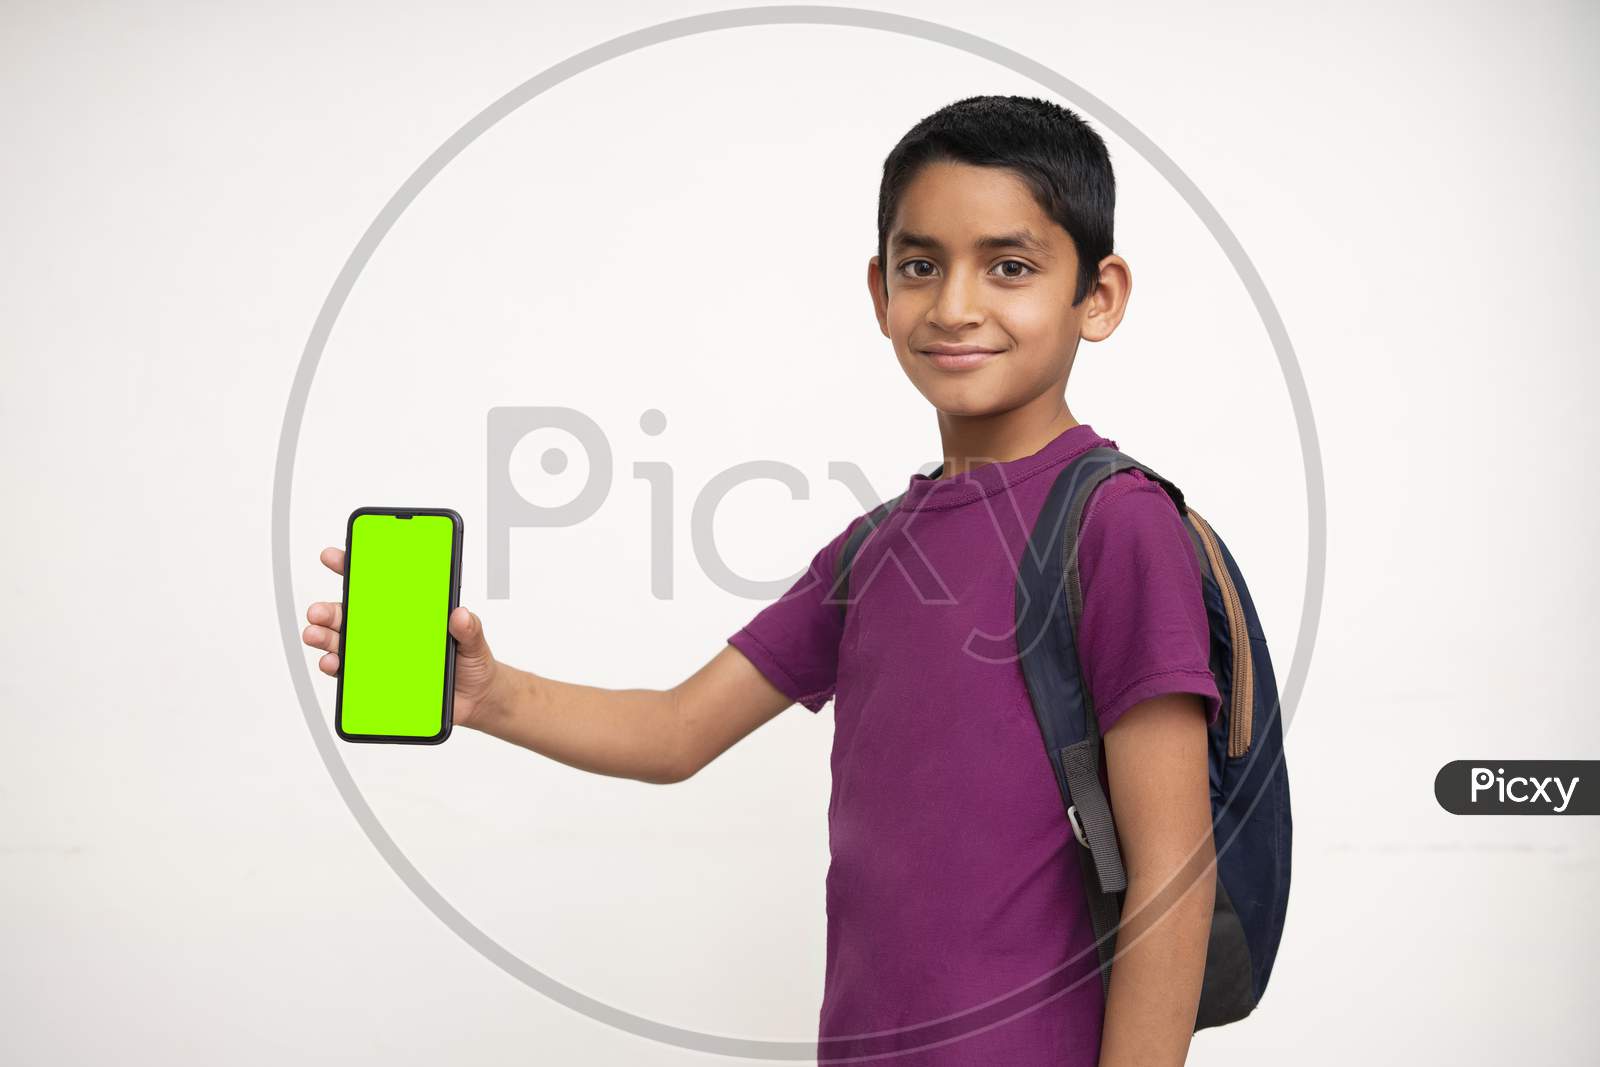 Young Indian Kid Holding A Phone In His Hand With A Green Screen, School Bag In His Back And Wearing Purple T-Shirt Standing On White Isolated Background.